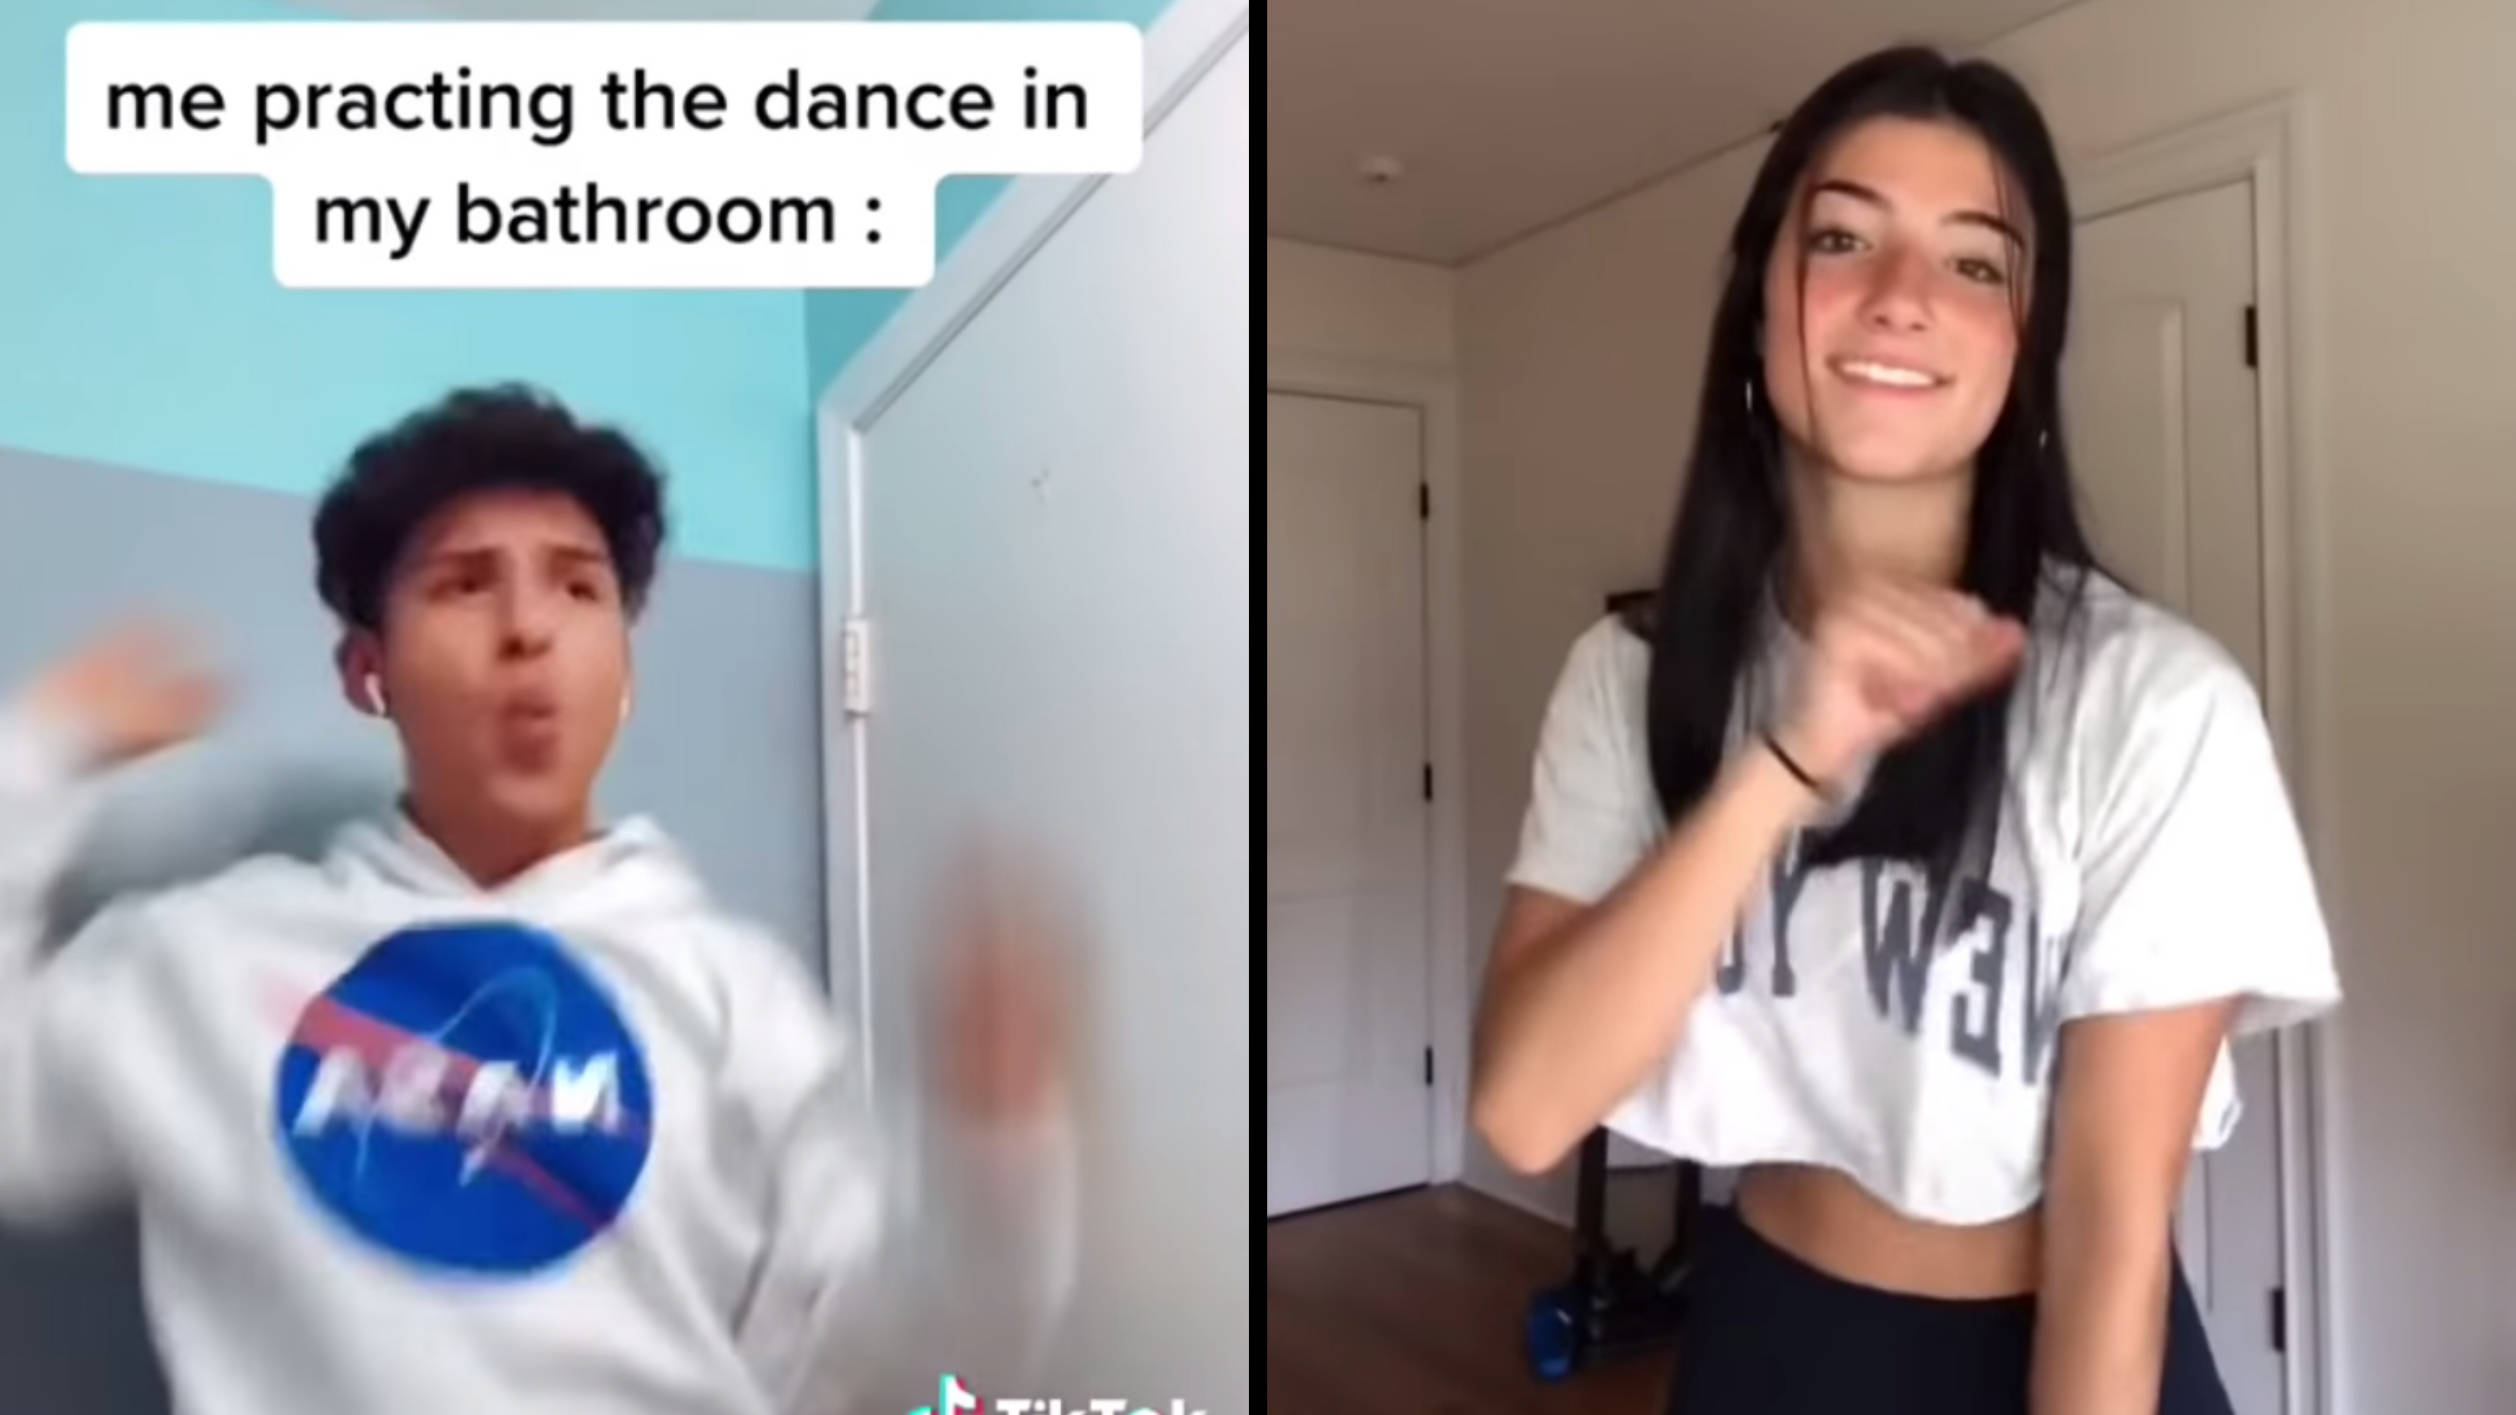 Who Created The Renegade Dance On Tiktok The New Tiktok Challenge Going Viral Popbuzz Oh nanana【remix】full song from tik tok this song is all over tik tok (musically) free download: the renegade dance on tiktok